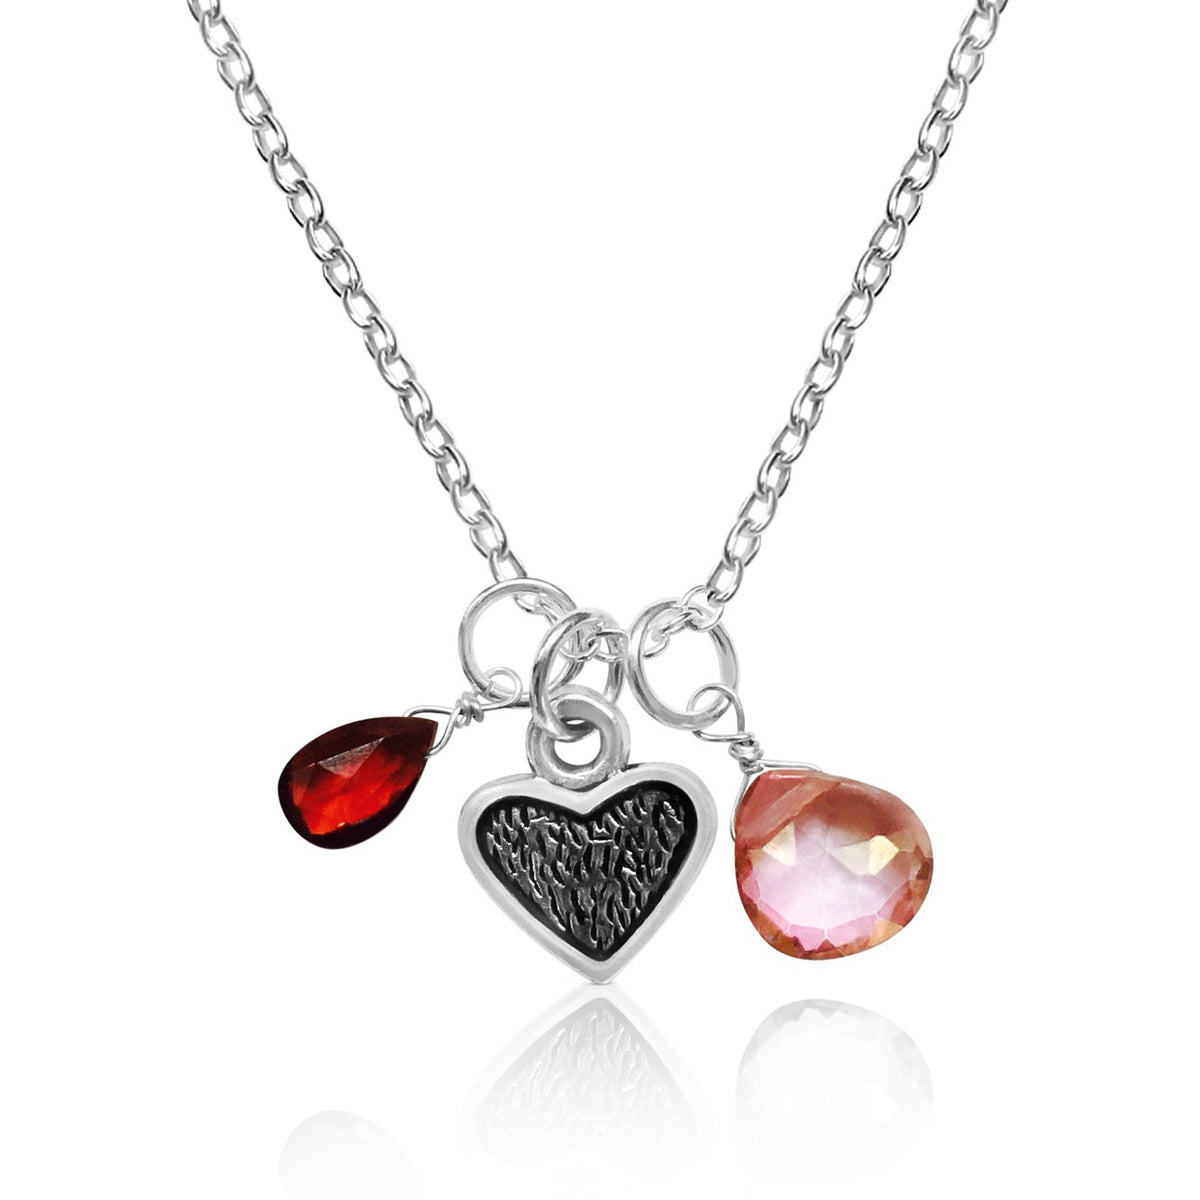 Loving Heart Necklace with Garnet and Rose Quartz